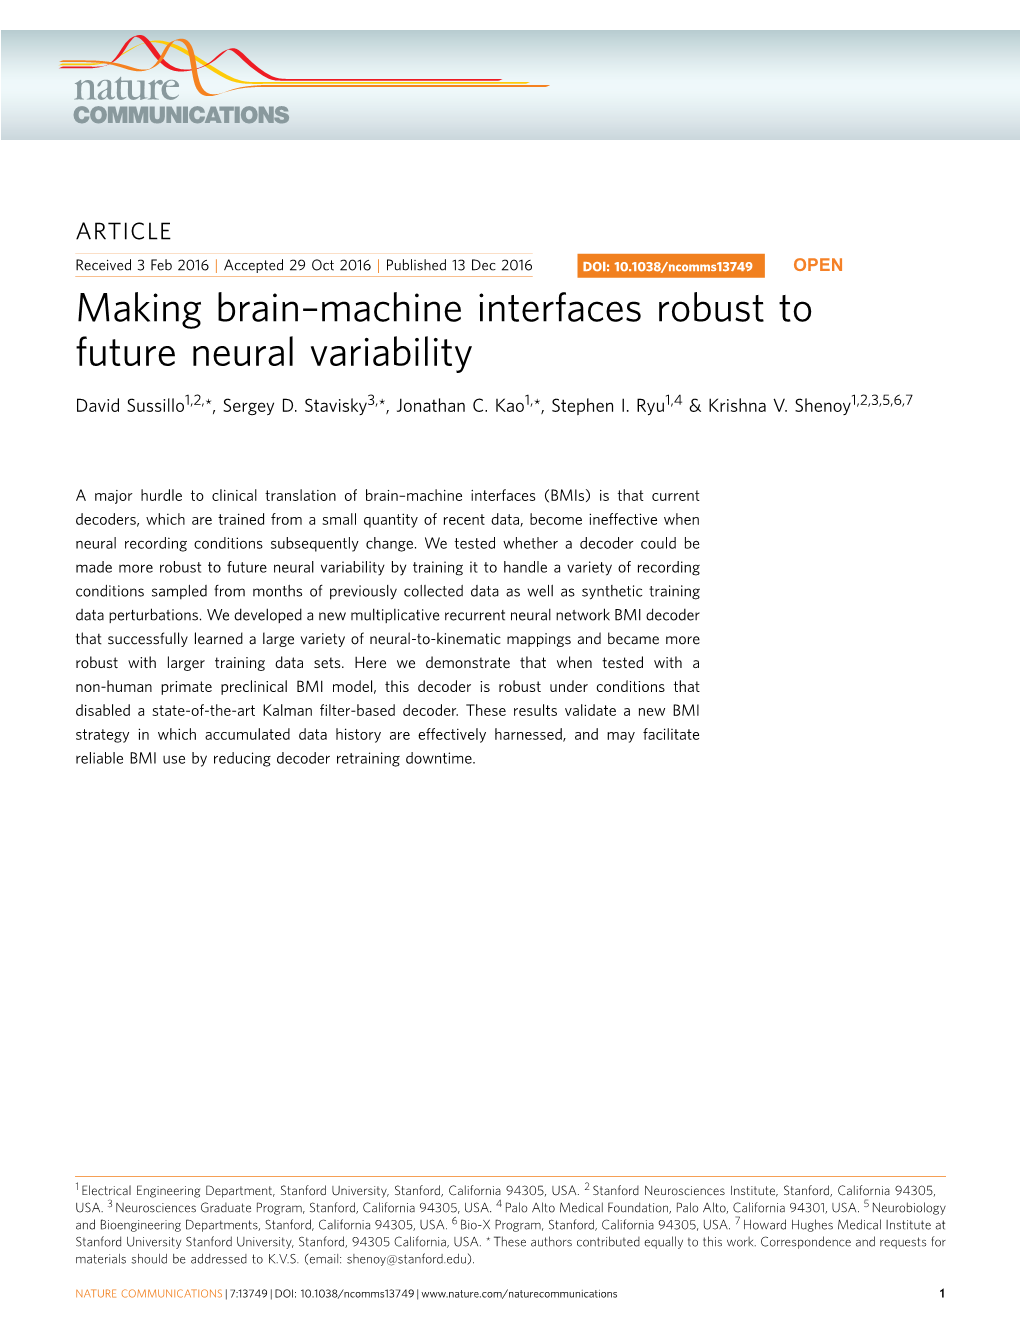 Machine Interfaces Robust to Future Neural Variability